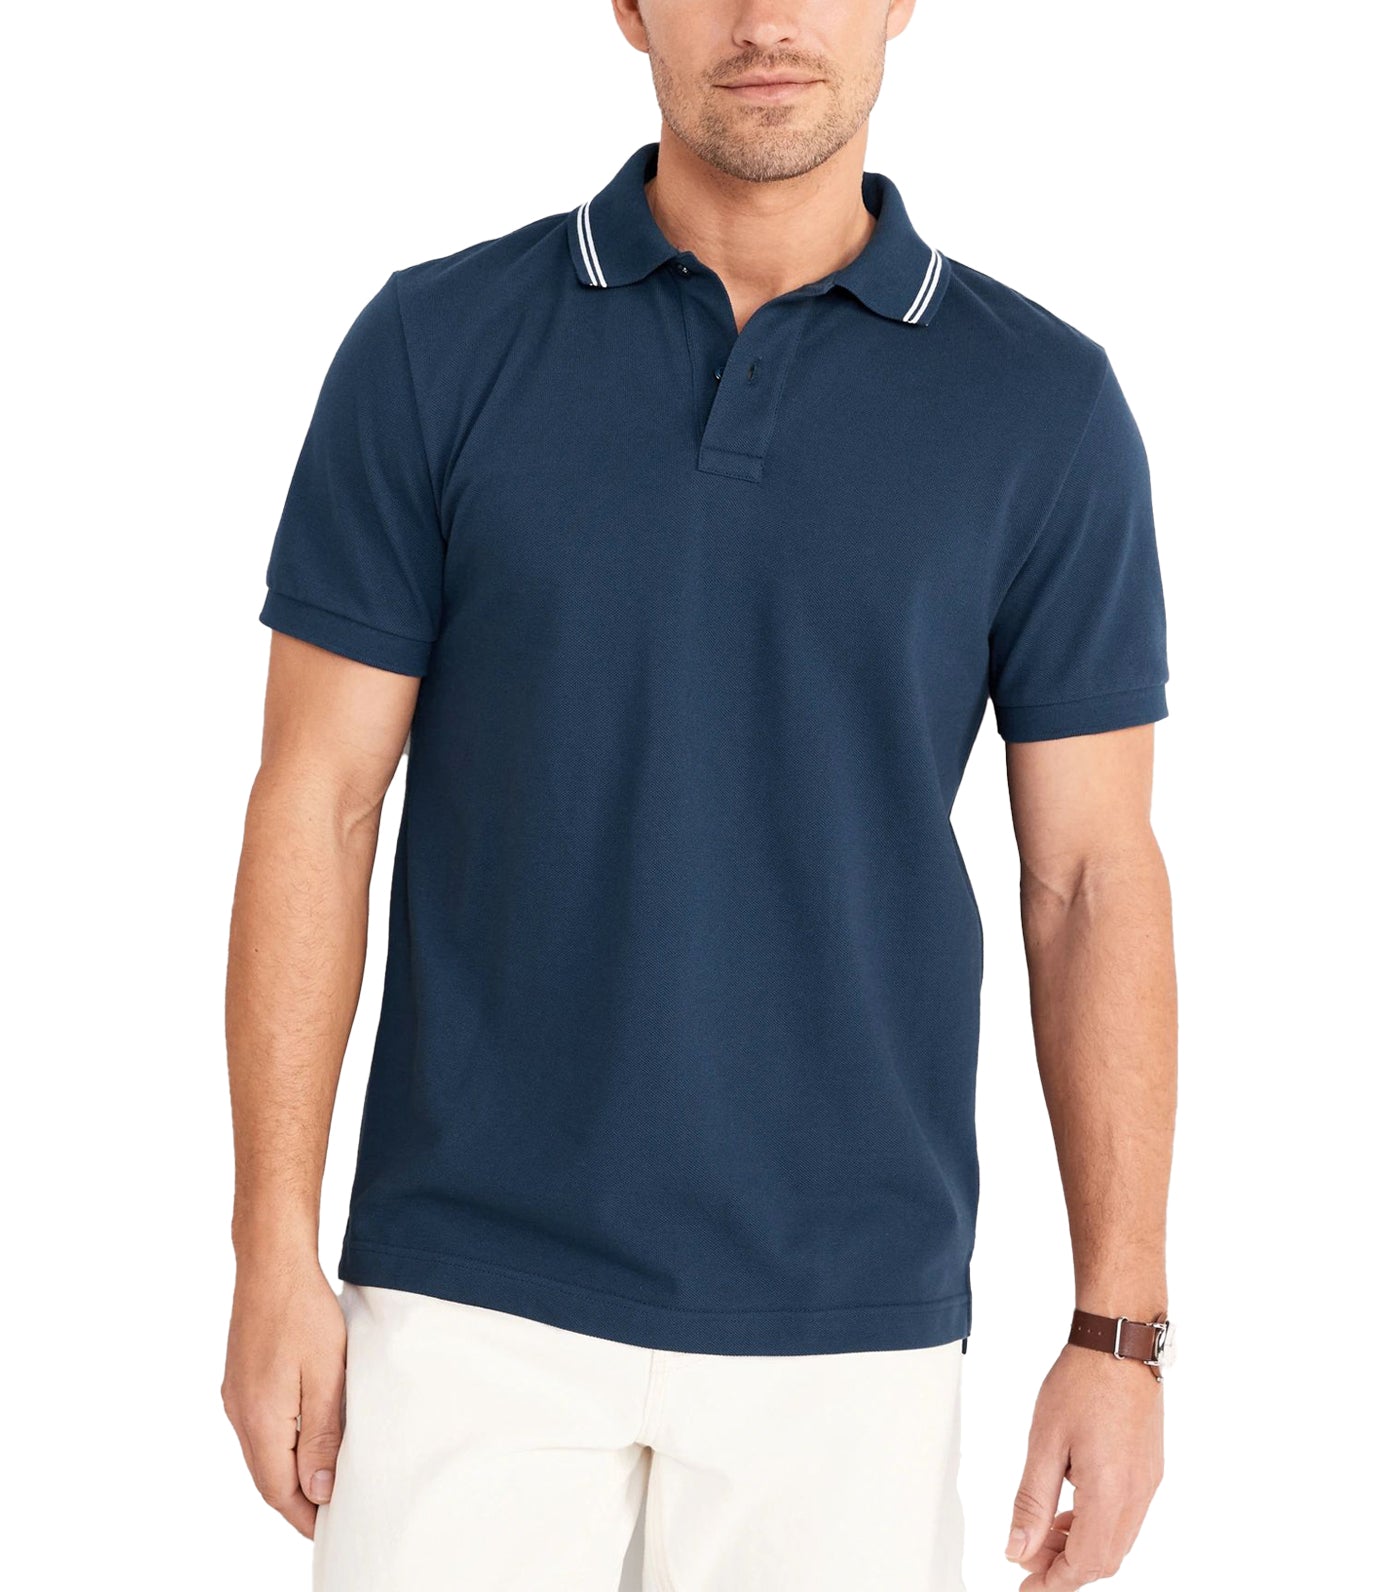 Tipped-Collar Classic Fit Pique Polo for Men Obscure Night